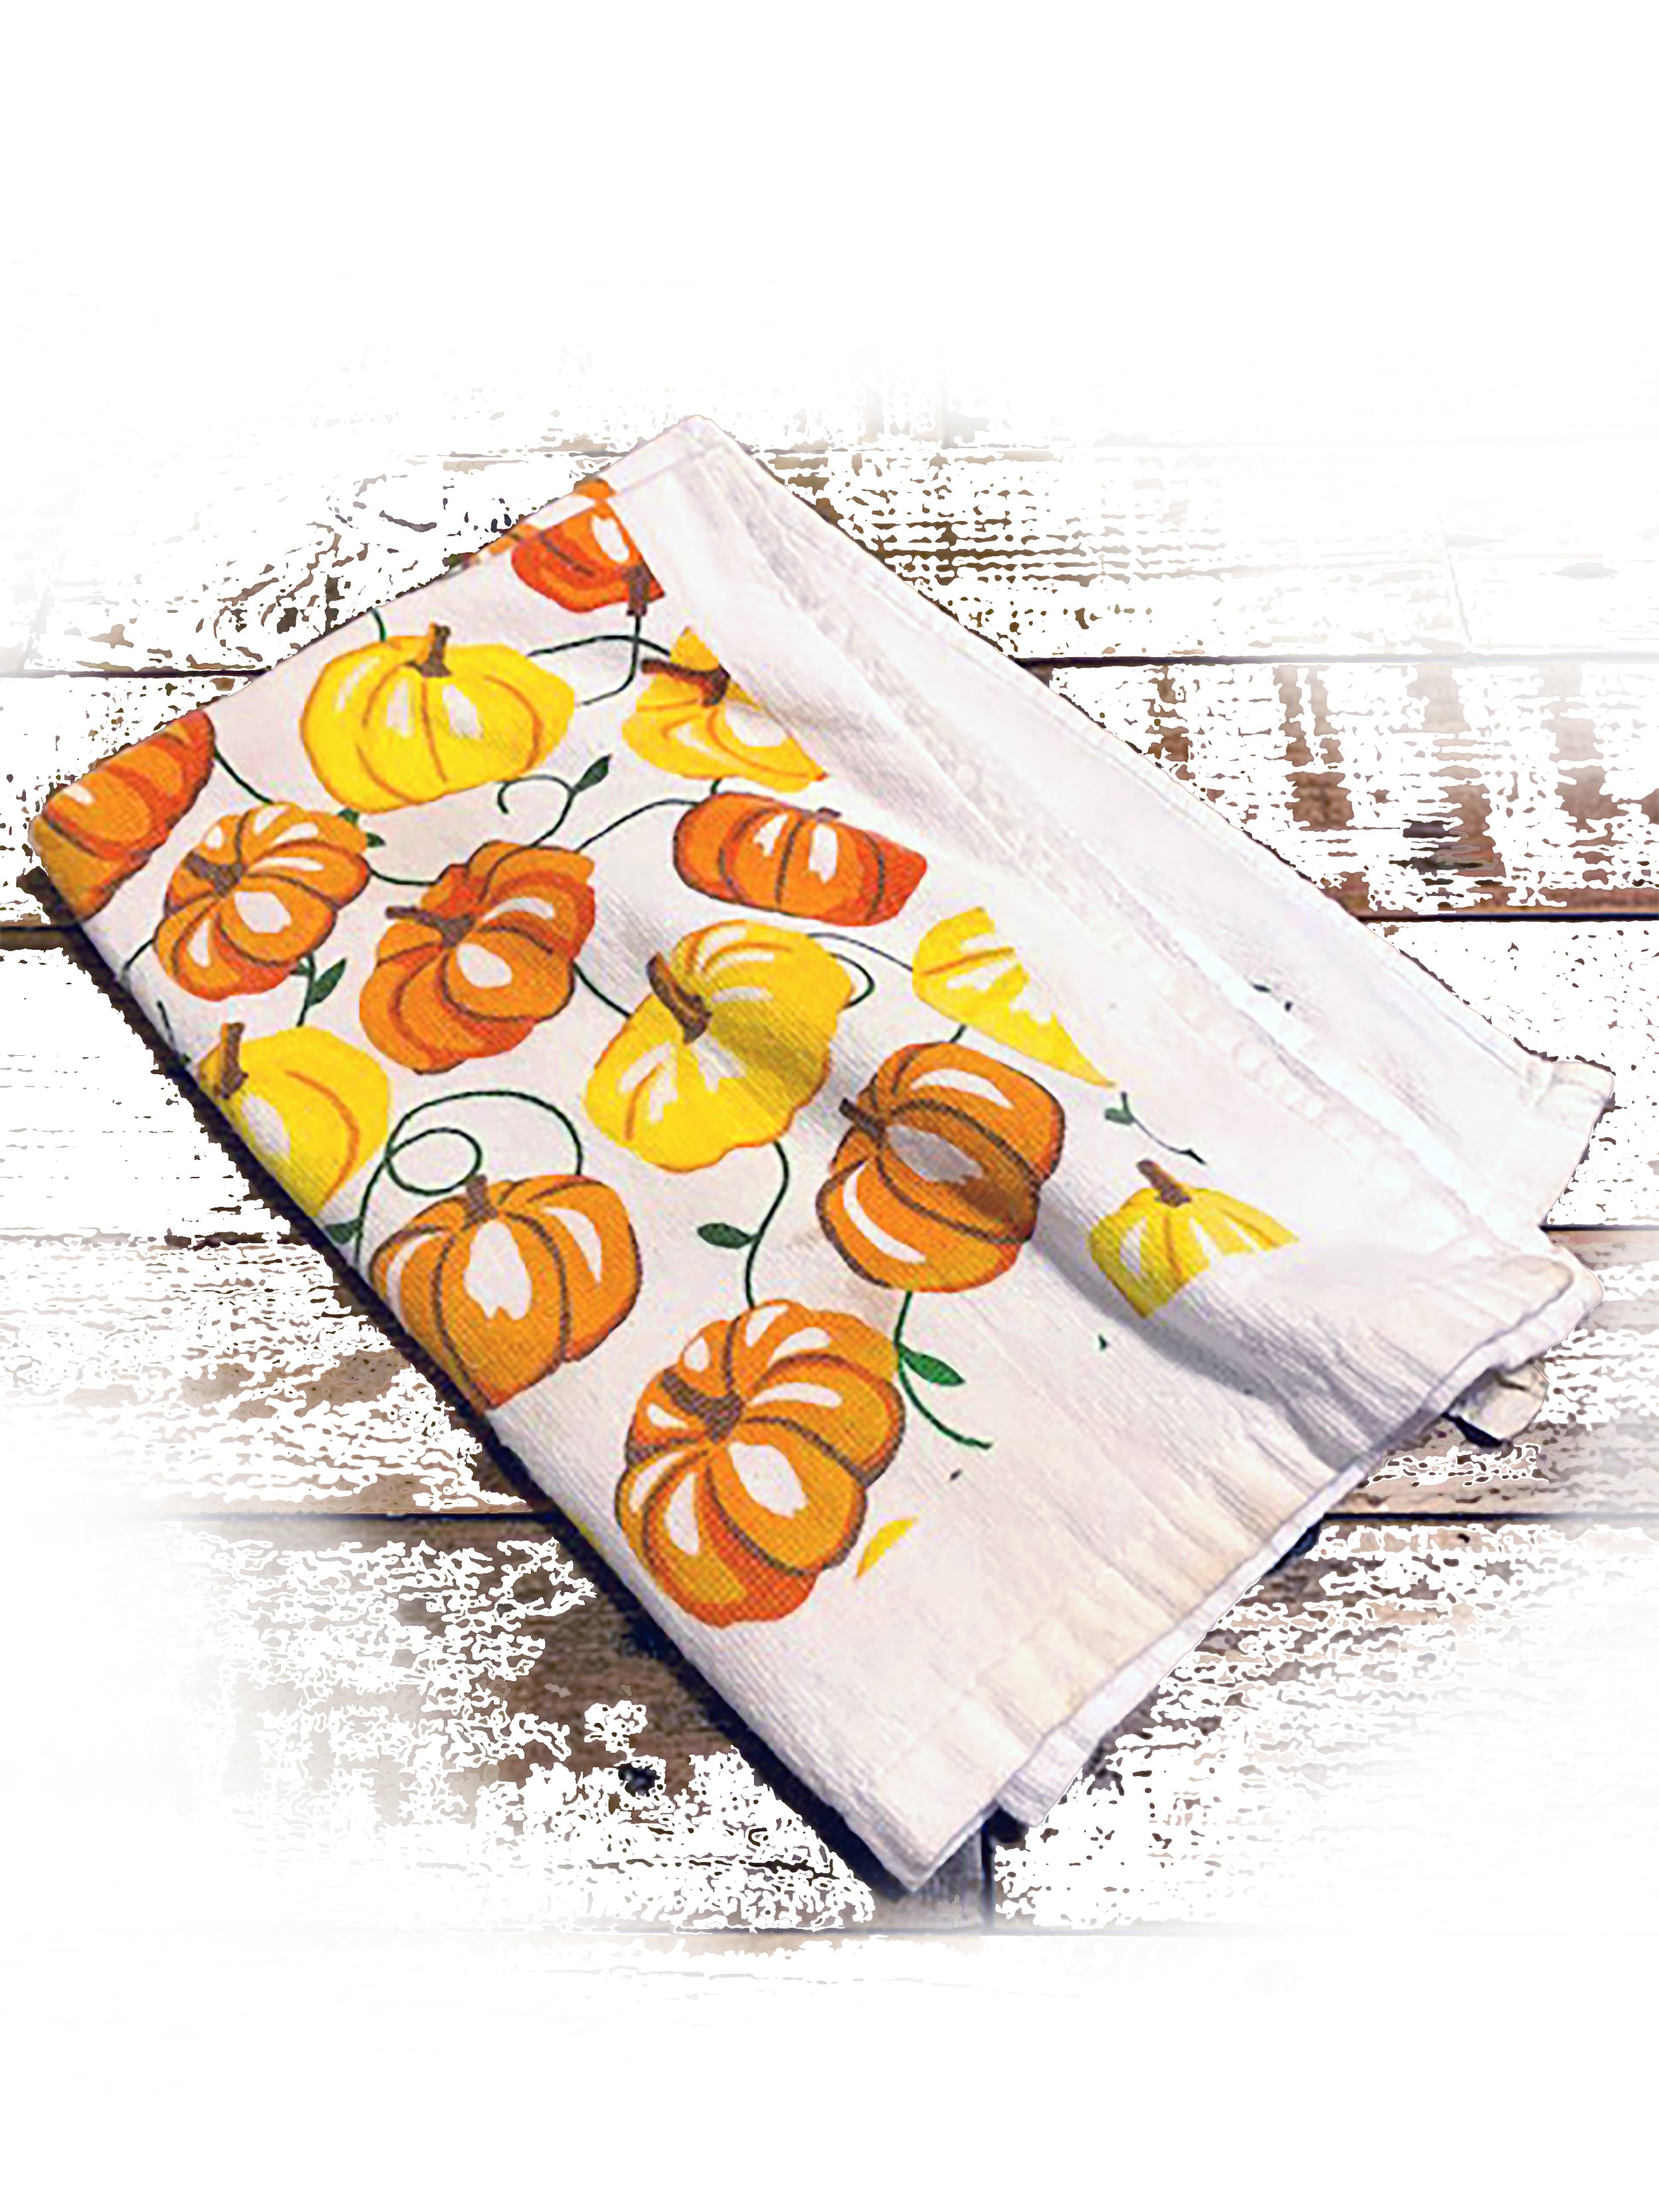    This is an old Kitchen Towel. Everyday when I clean the kitchen, the images of orange and yellow pumpkins bring me back to a season of creativity, family, and an overload of treats.   ~ De’Andre Burton  